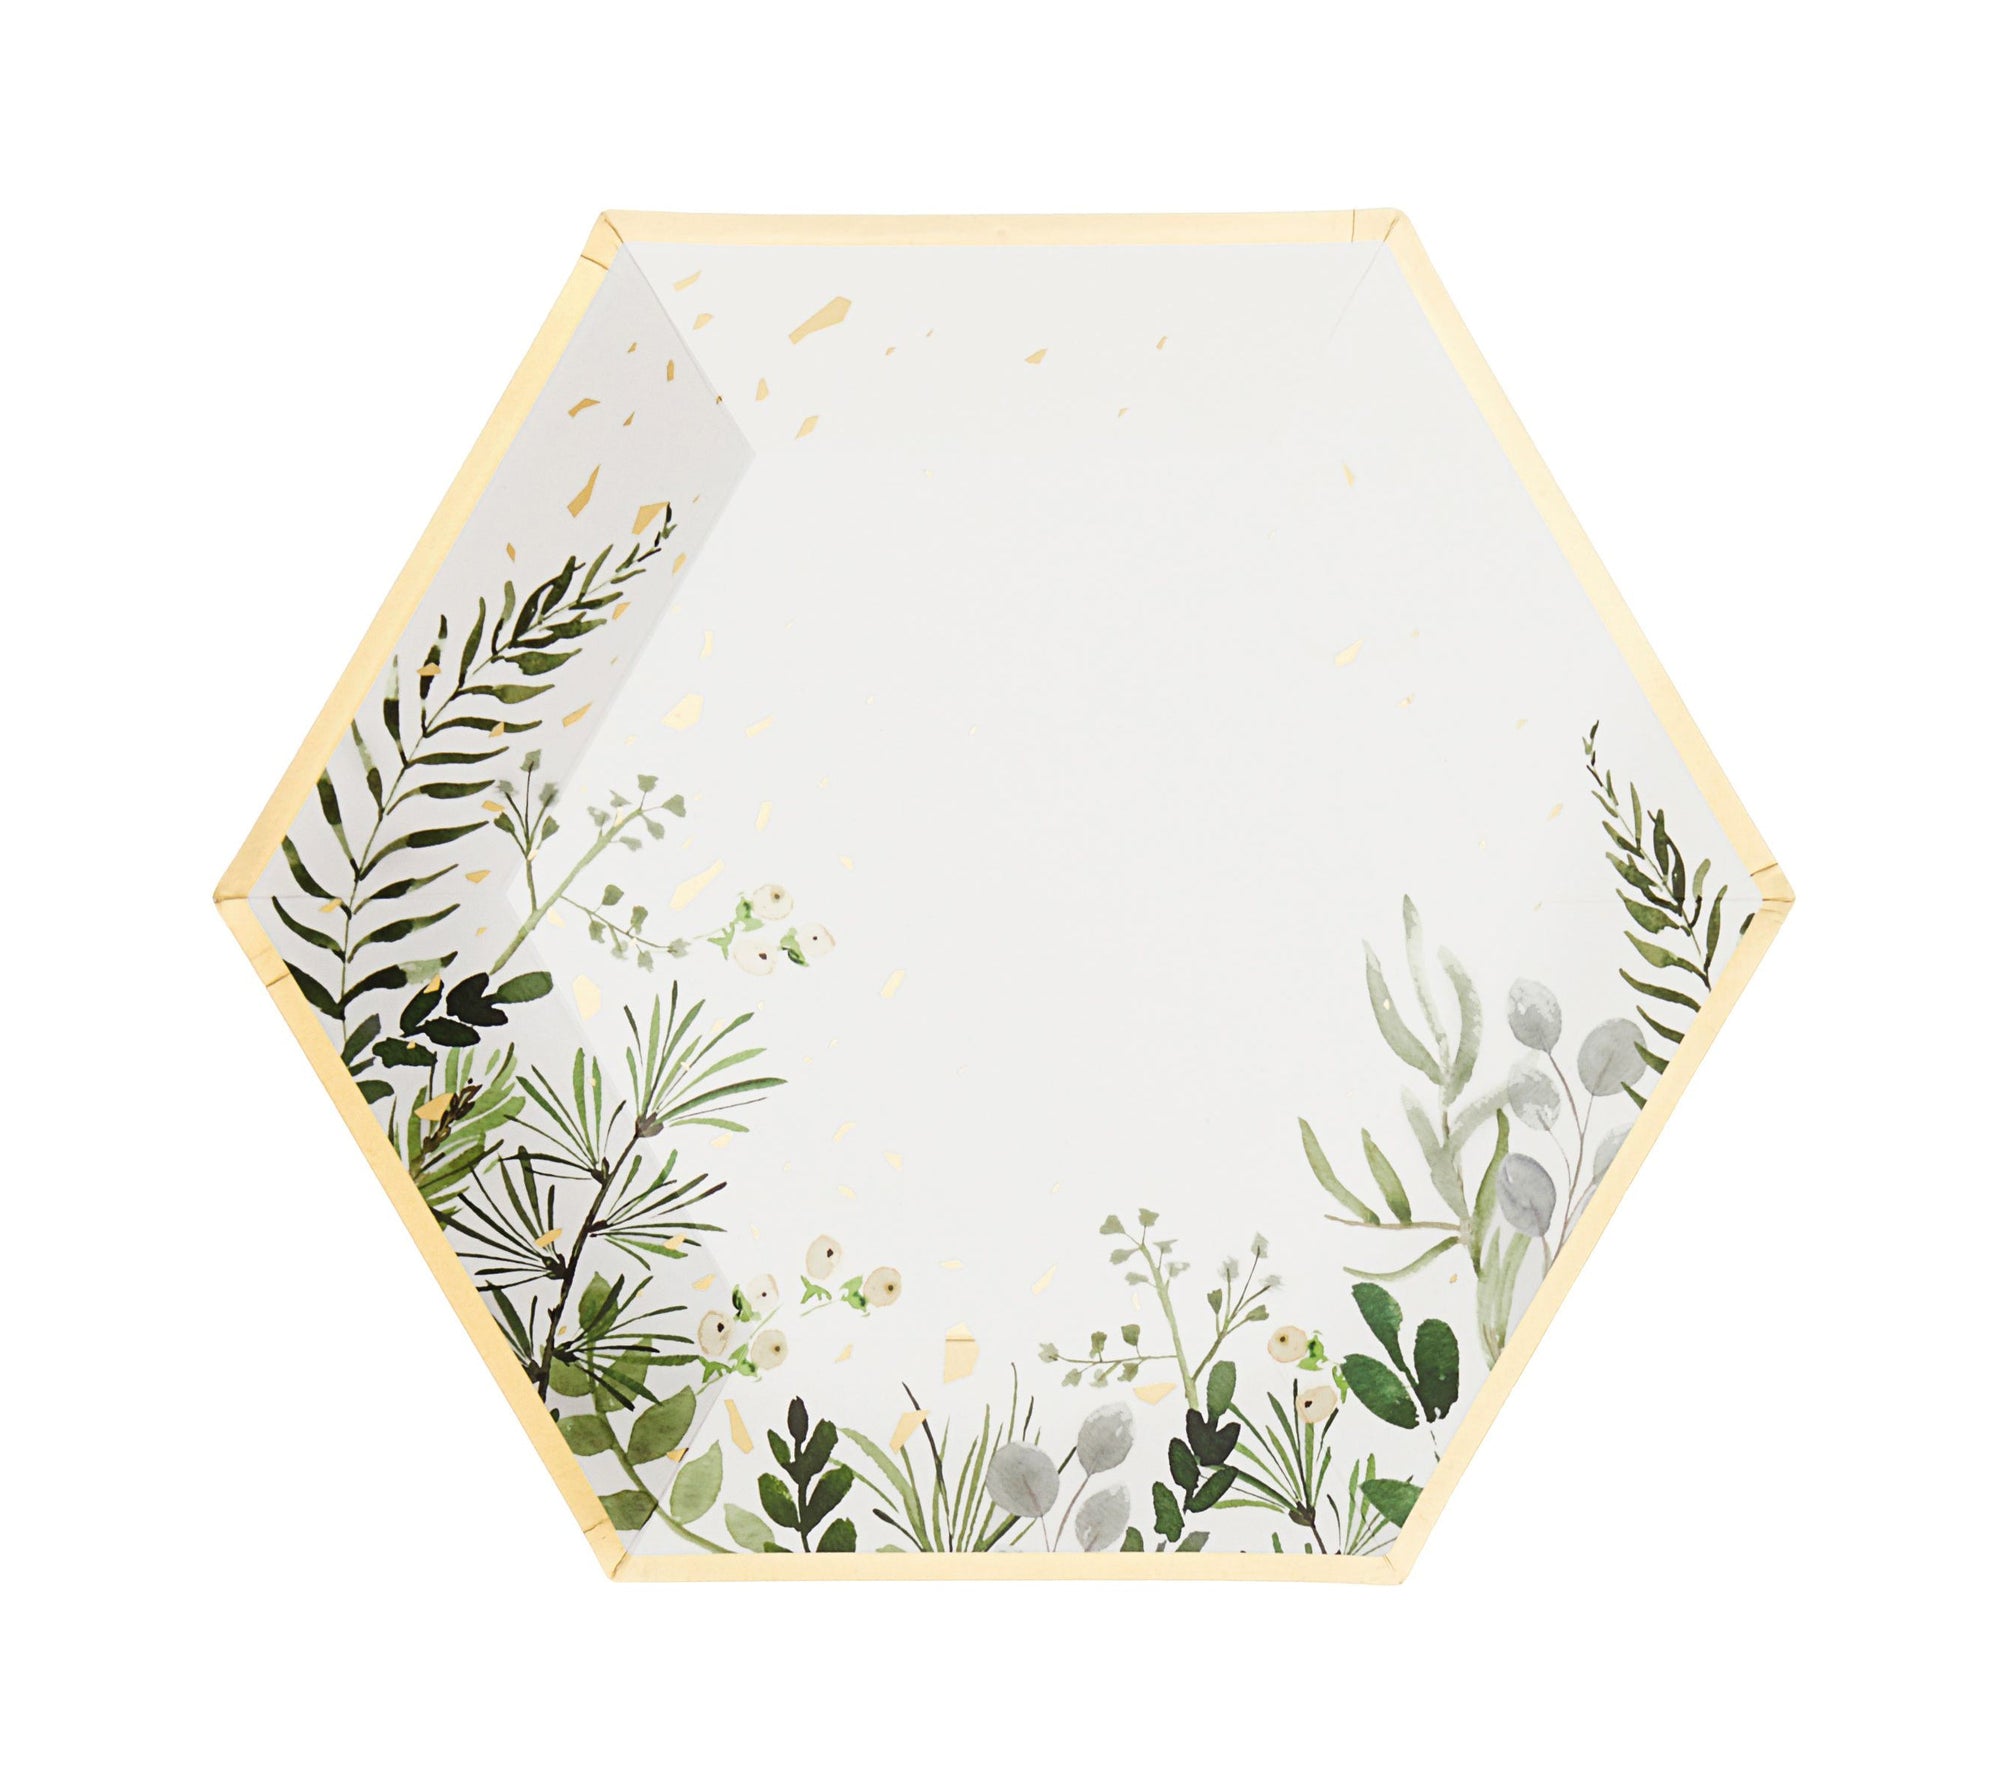 Secret Garden White Botanicals Large Paper Plates - Harlow & Grey Tableware - Bridal Shower, Baby Shower, Botanical Party Supplies, Garden Themed Birthday Party, Eucalyptus Party Decors